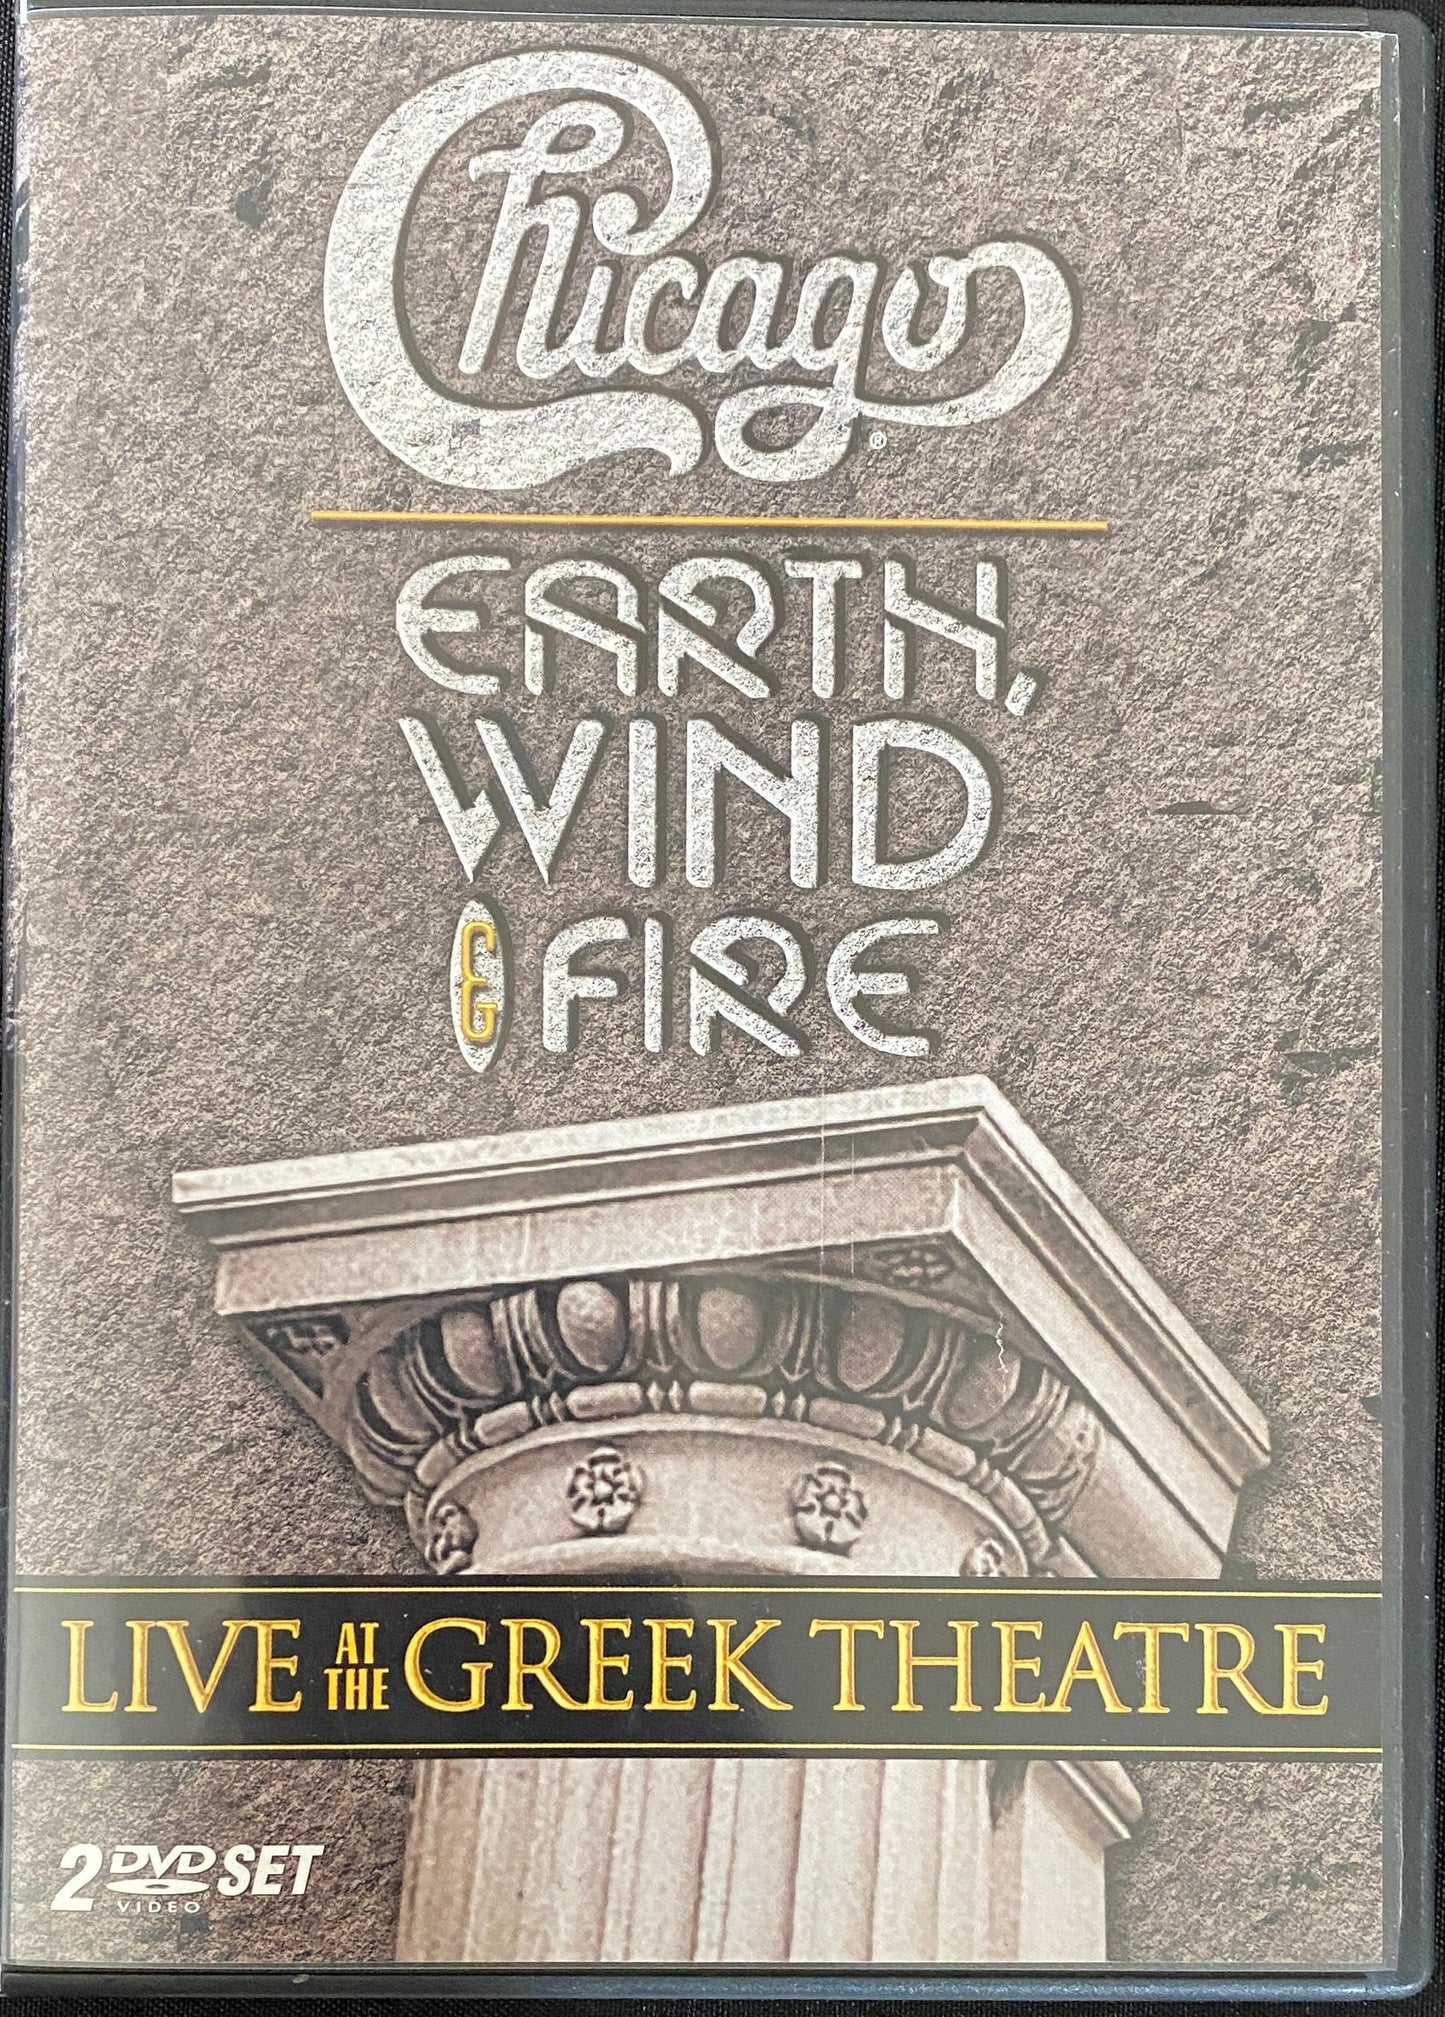 Chicago / Earth Wind & Fire -  Live at the Greek Theatre